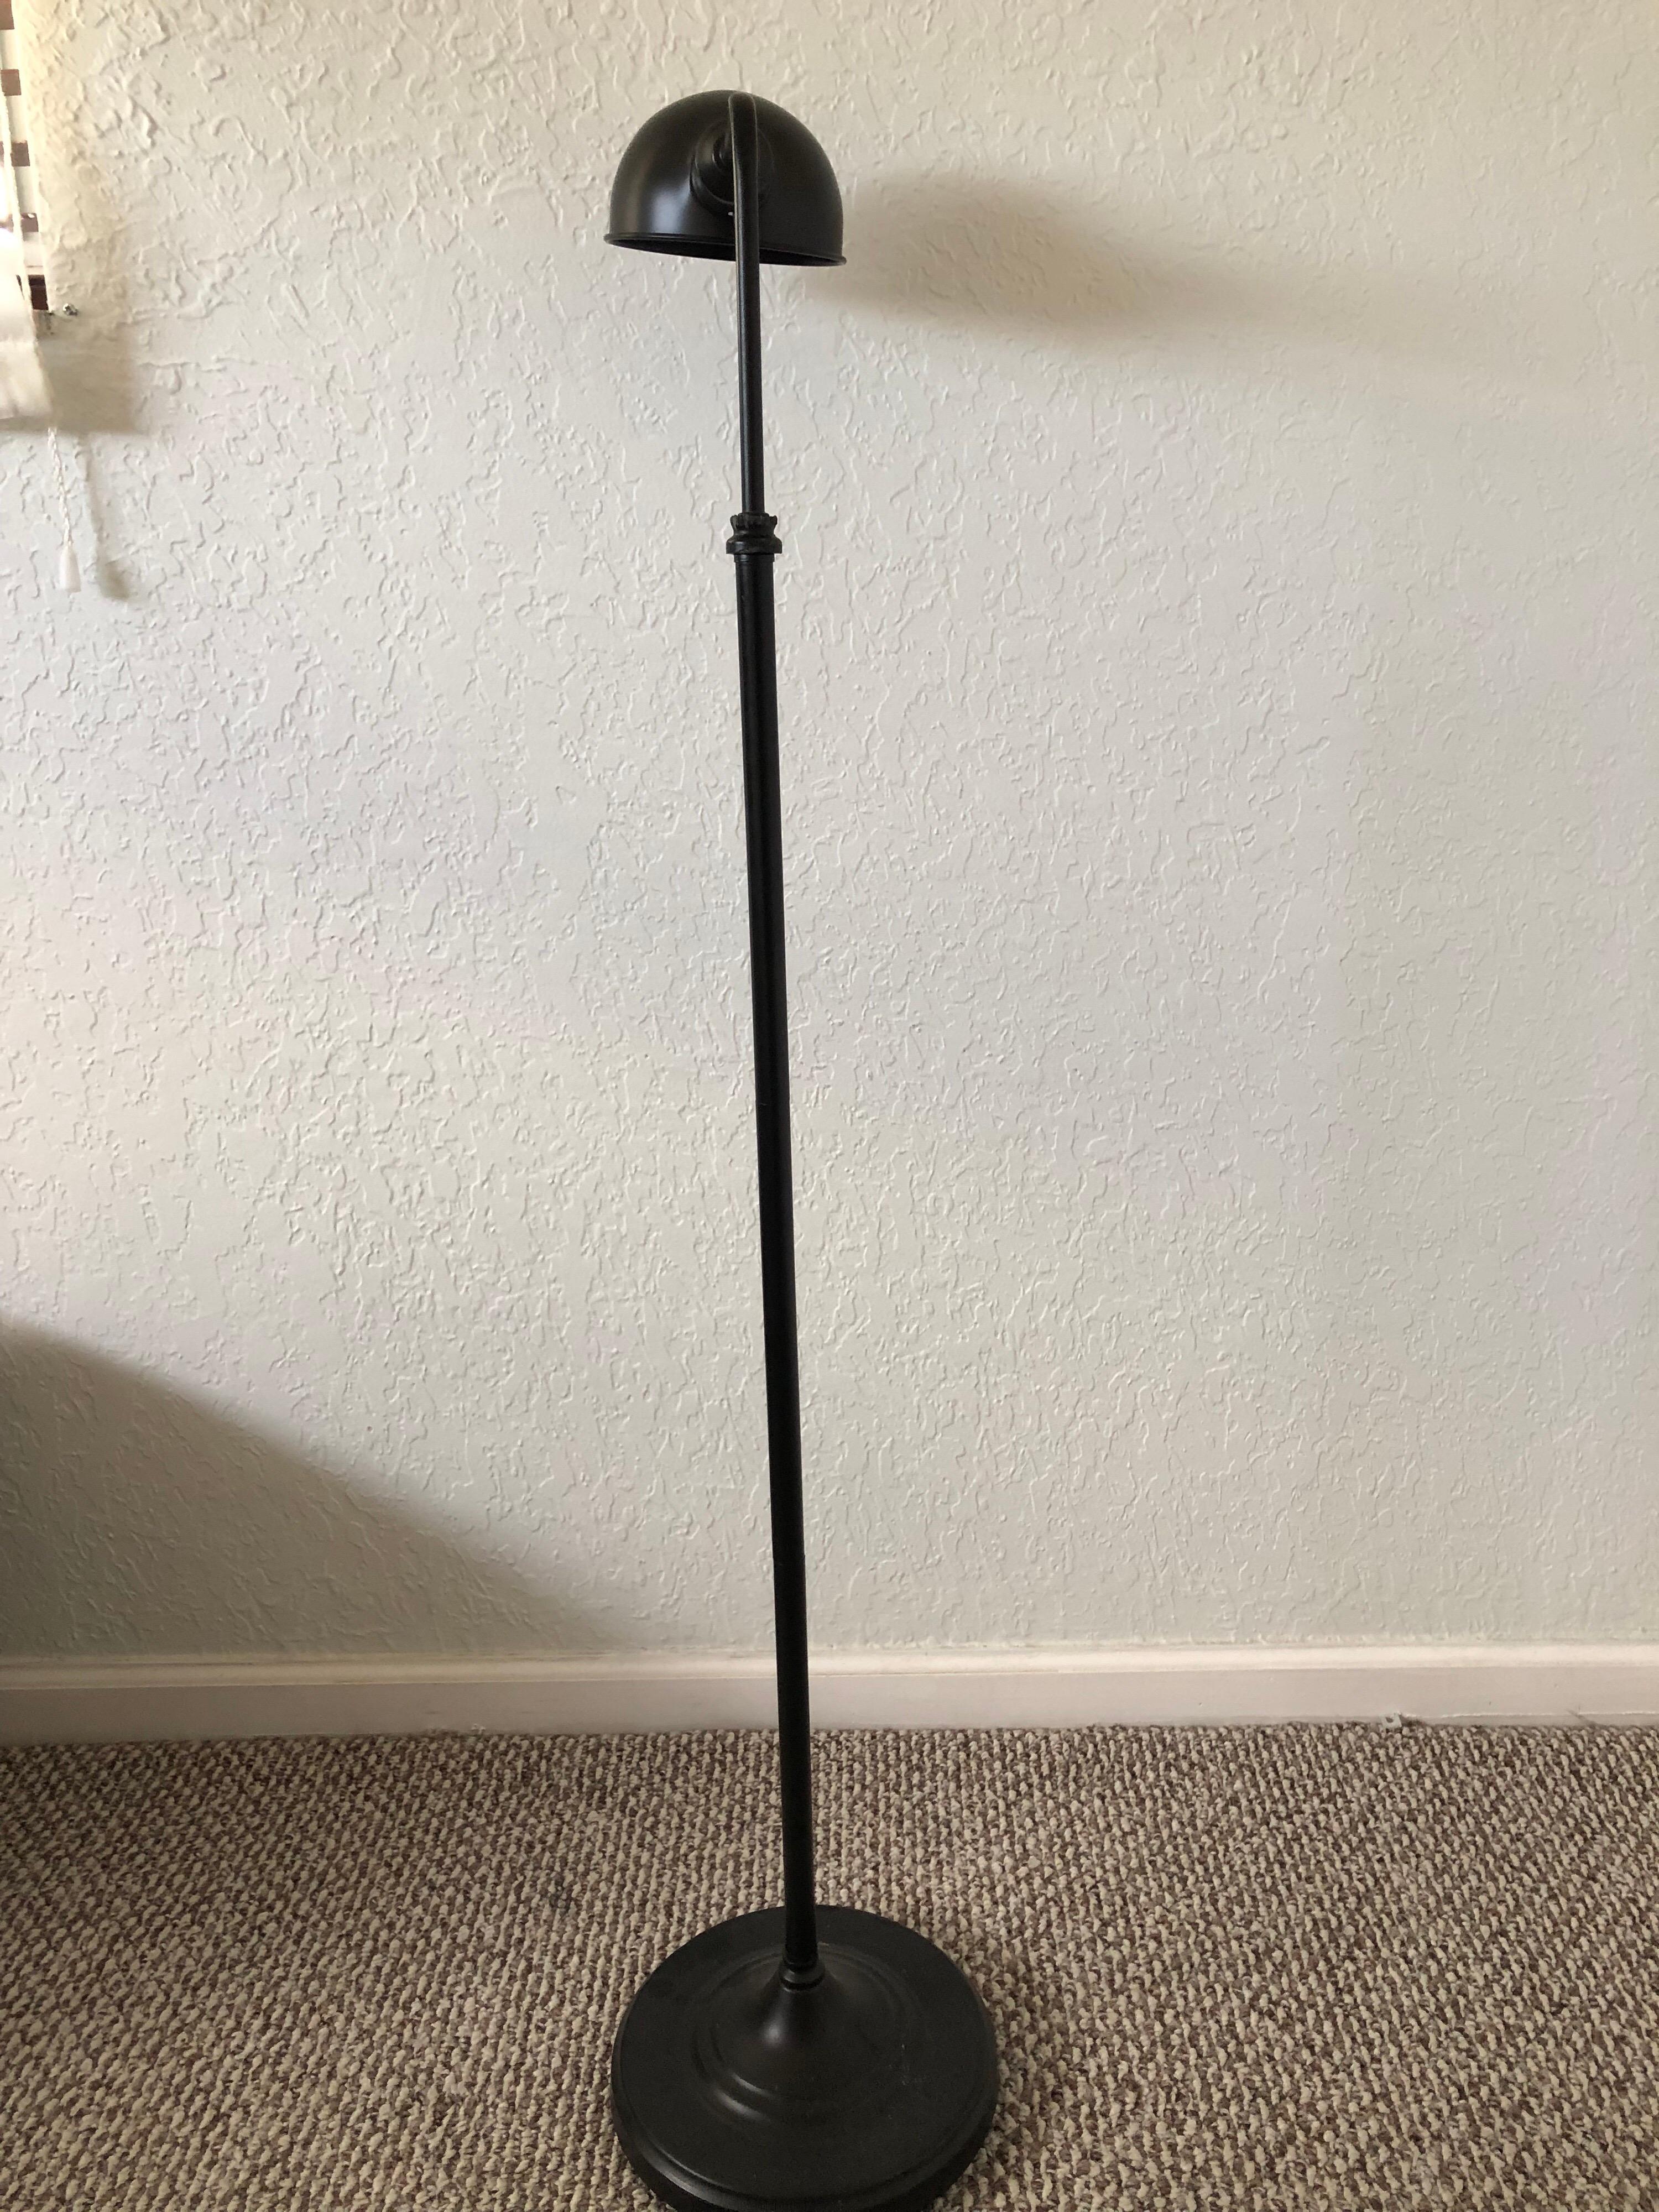 Bronze color metal floor lamp with round shade.
Size: 10